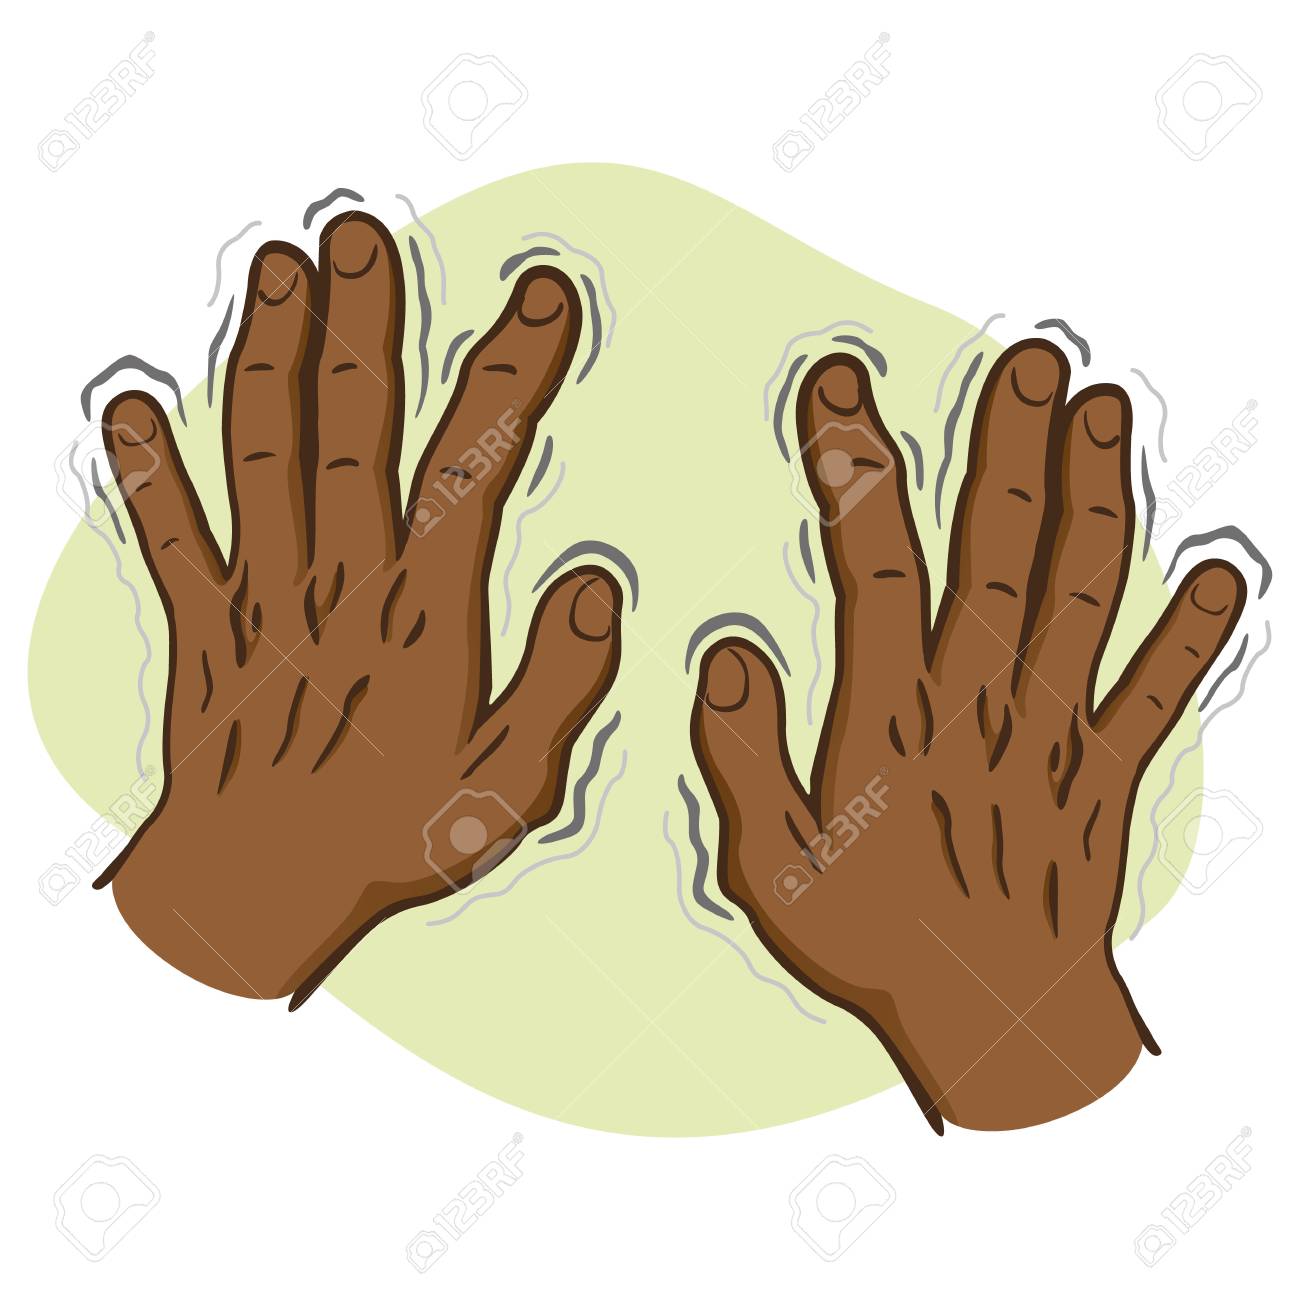 fingers clipart pair hand